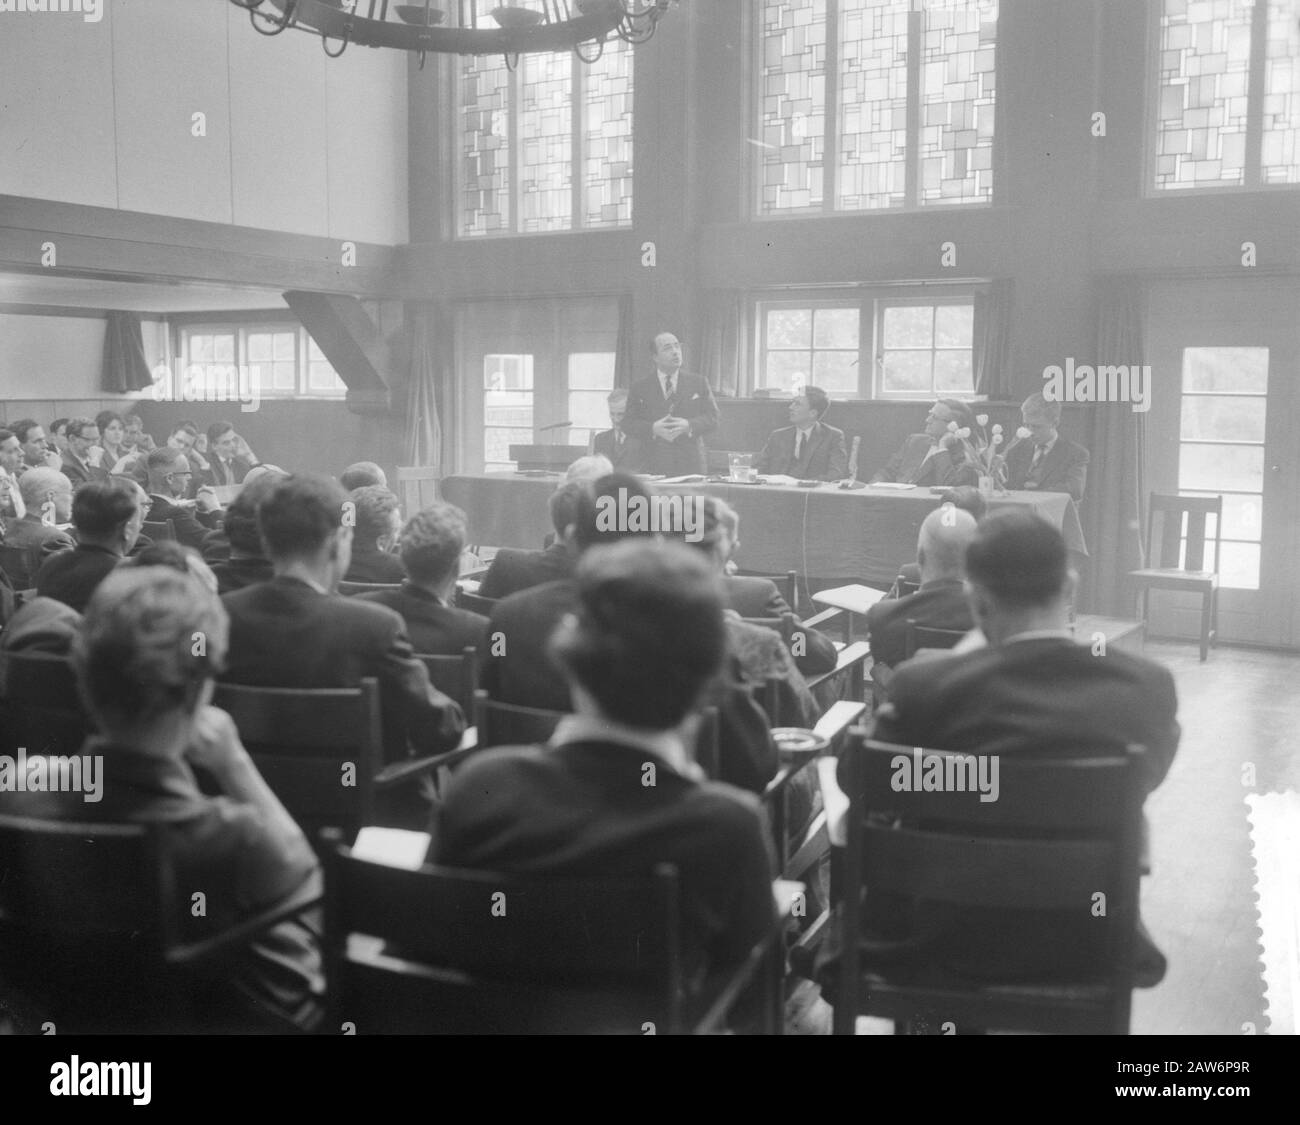 Minister Mr. J. L. M. Th.. Cal opens 2nd annual conference of the Dutch Student Council Zeist Minister Cals during his opening date: April 11, 1960 Location: Utrecht, Zeist Keywords: CONFERENCES, openings, opening speeches Person Name: Cals, Jo Stock Photo